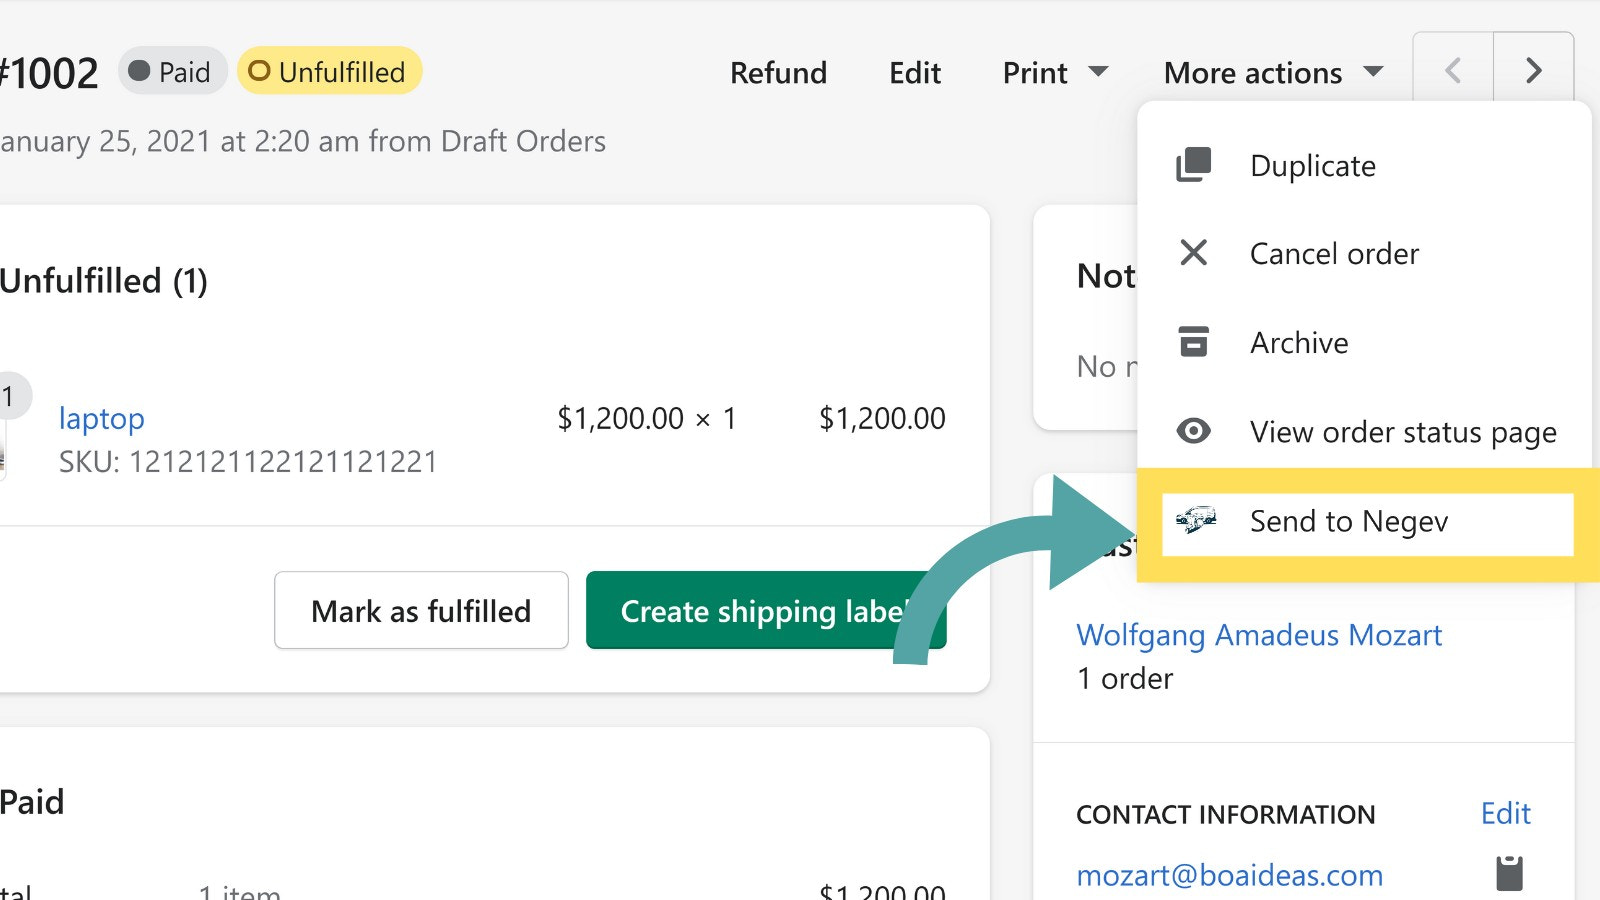 Generate your Negev shipments directly from the order view